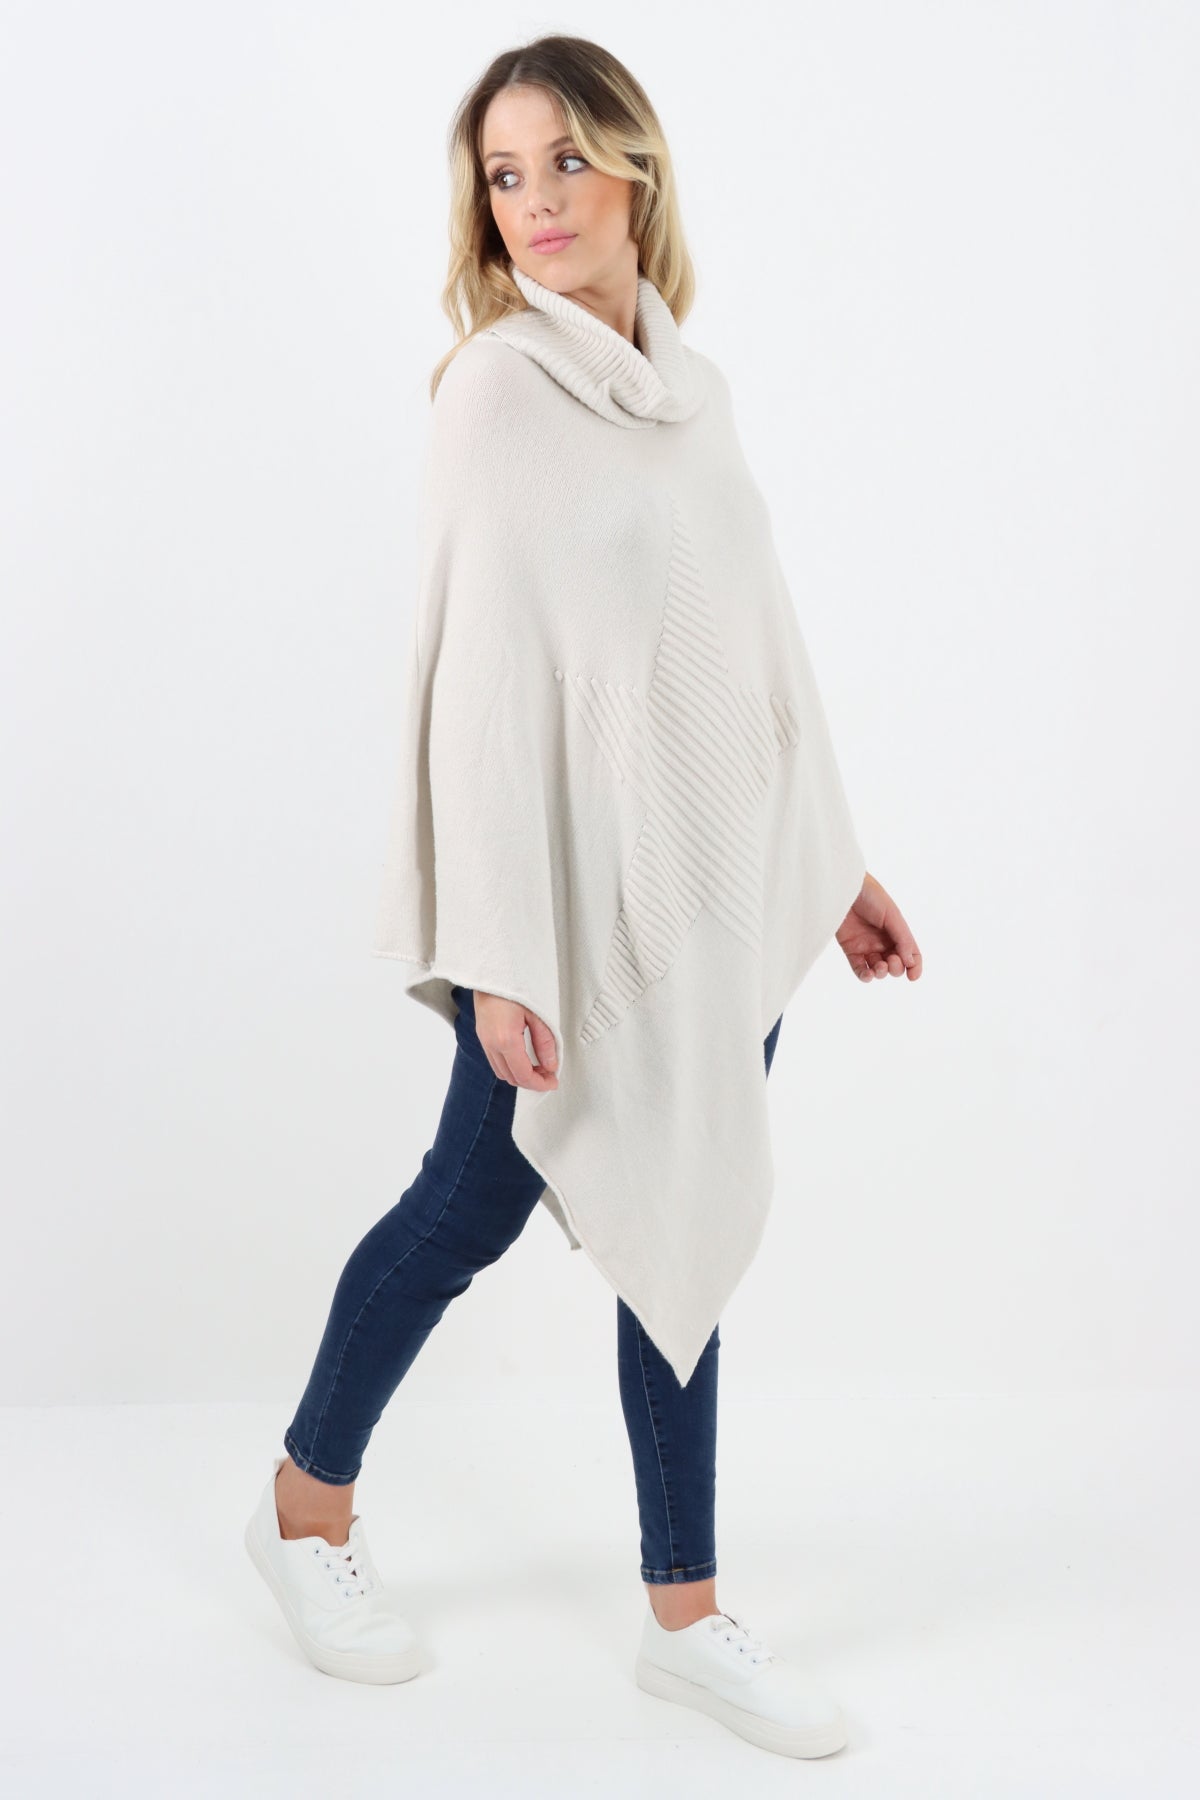 Made In Italy Star Ribbed Cowl Neck Poncho Top